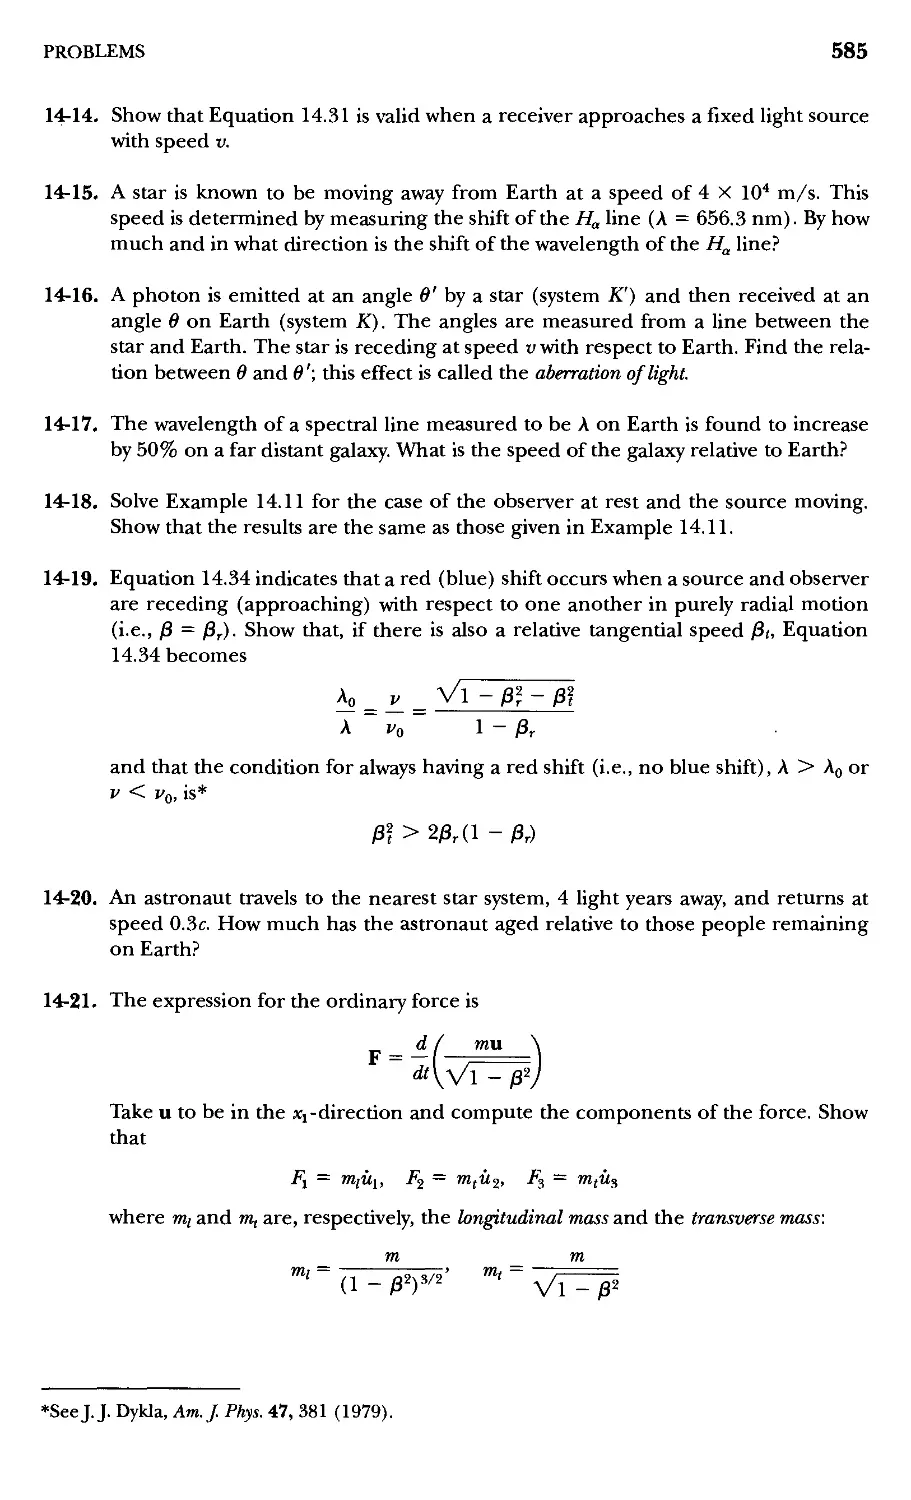 C. Ordinary Differential Equations of Second Order